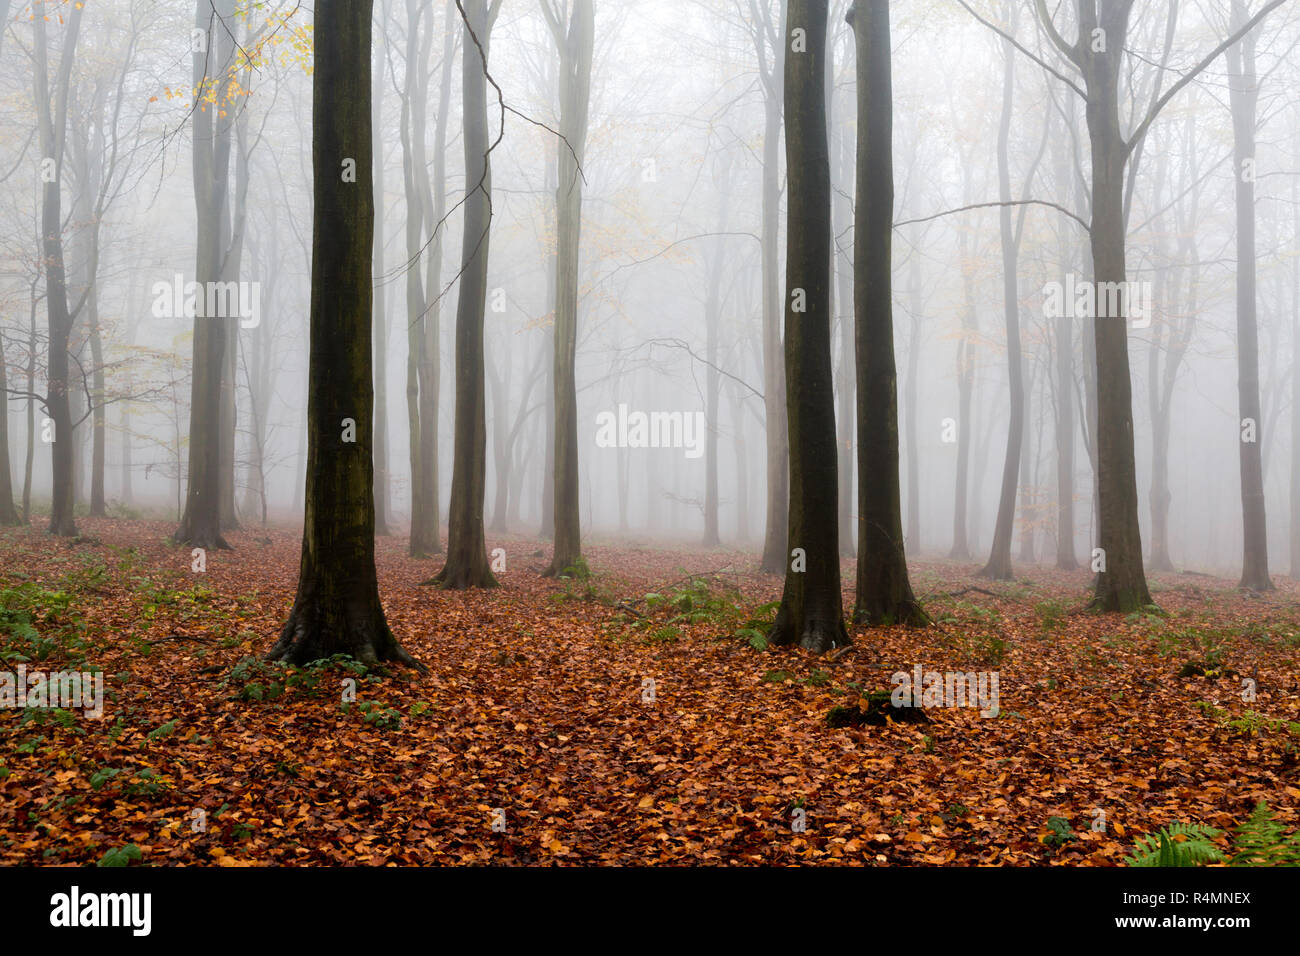 Misty beech wood during a November afternoon. King's Wood, Challock part of the Kent Downs AONB. Stock Photo